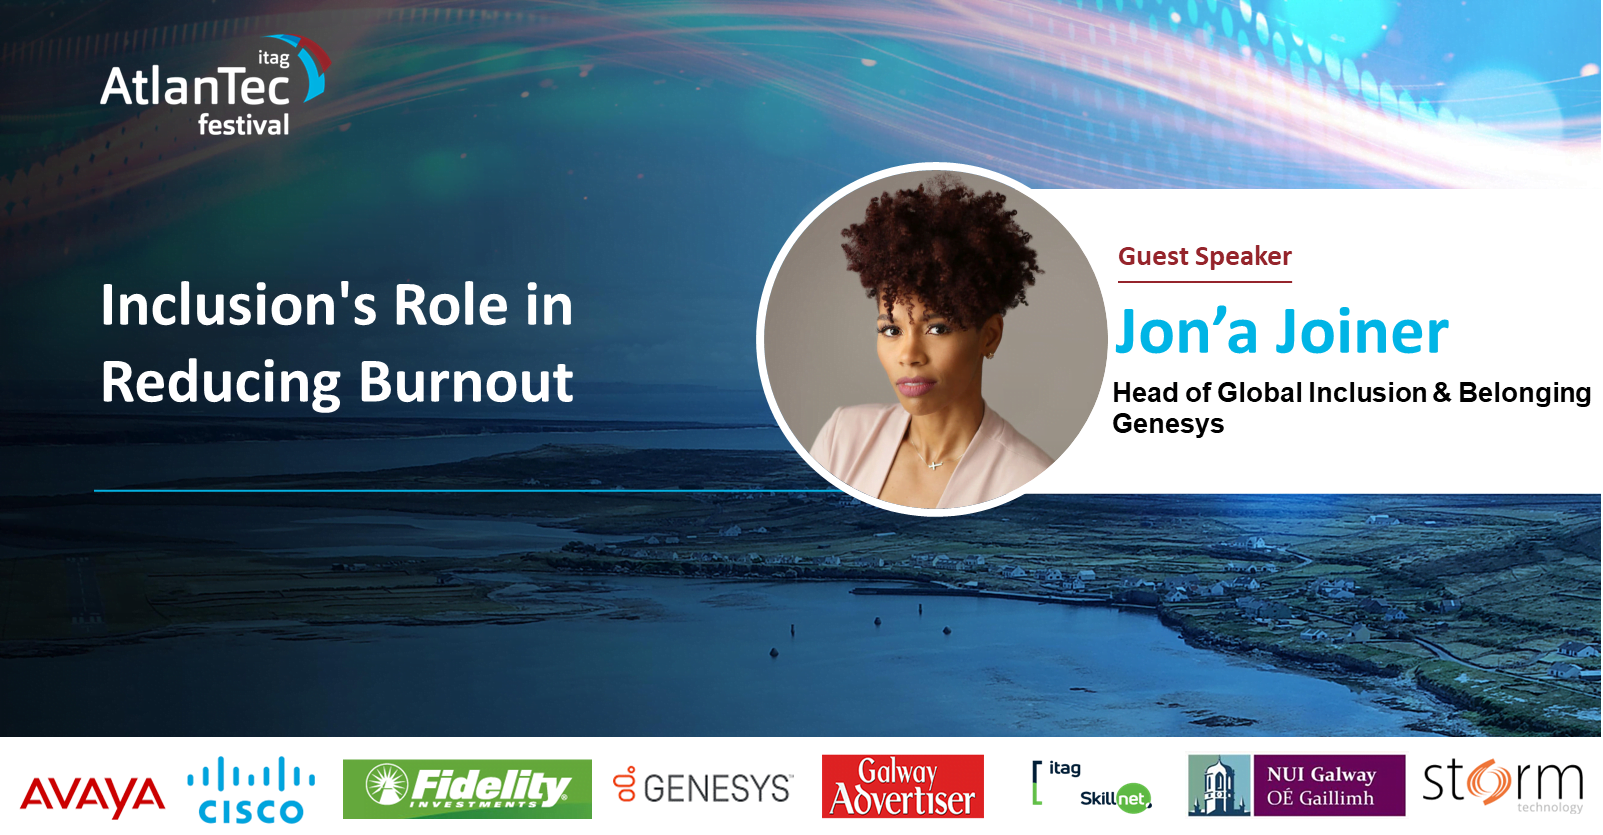  Inclusion’s Role in Reducing Burnout – Jon’a Joiner